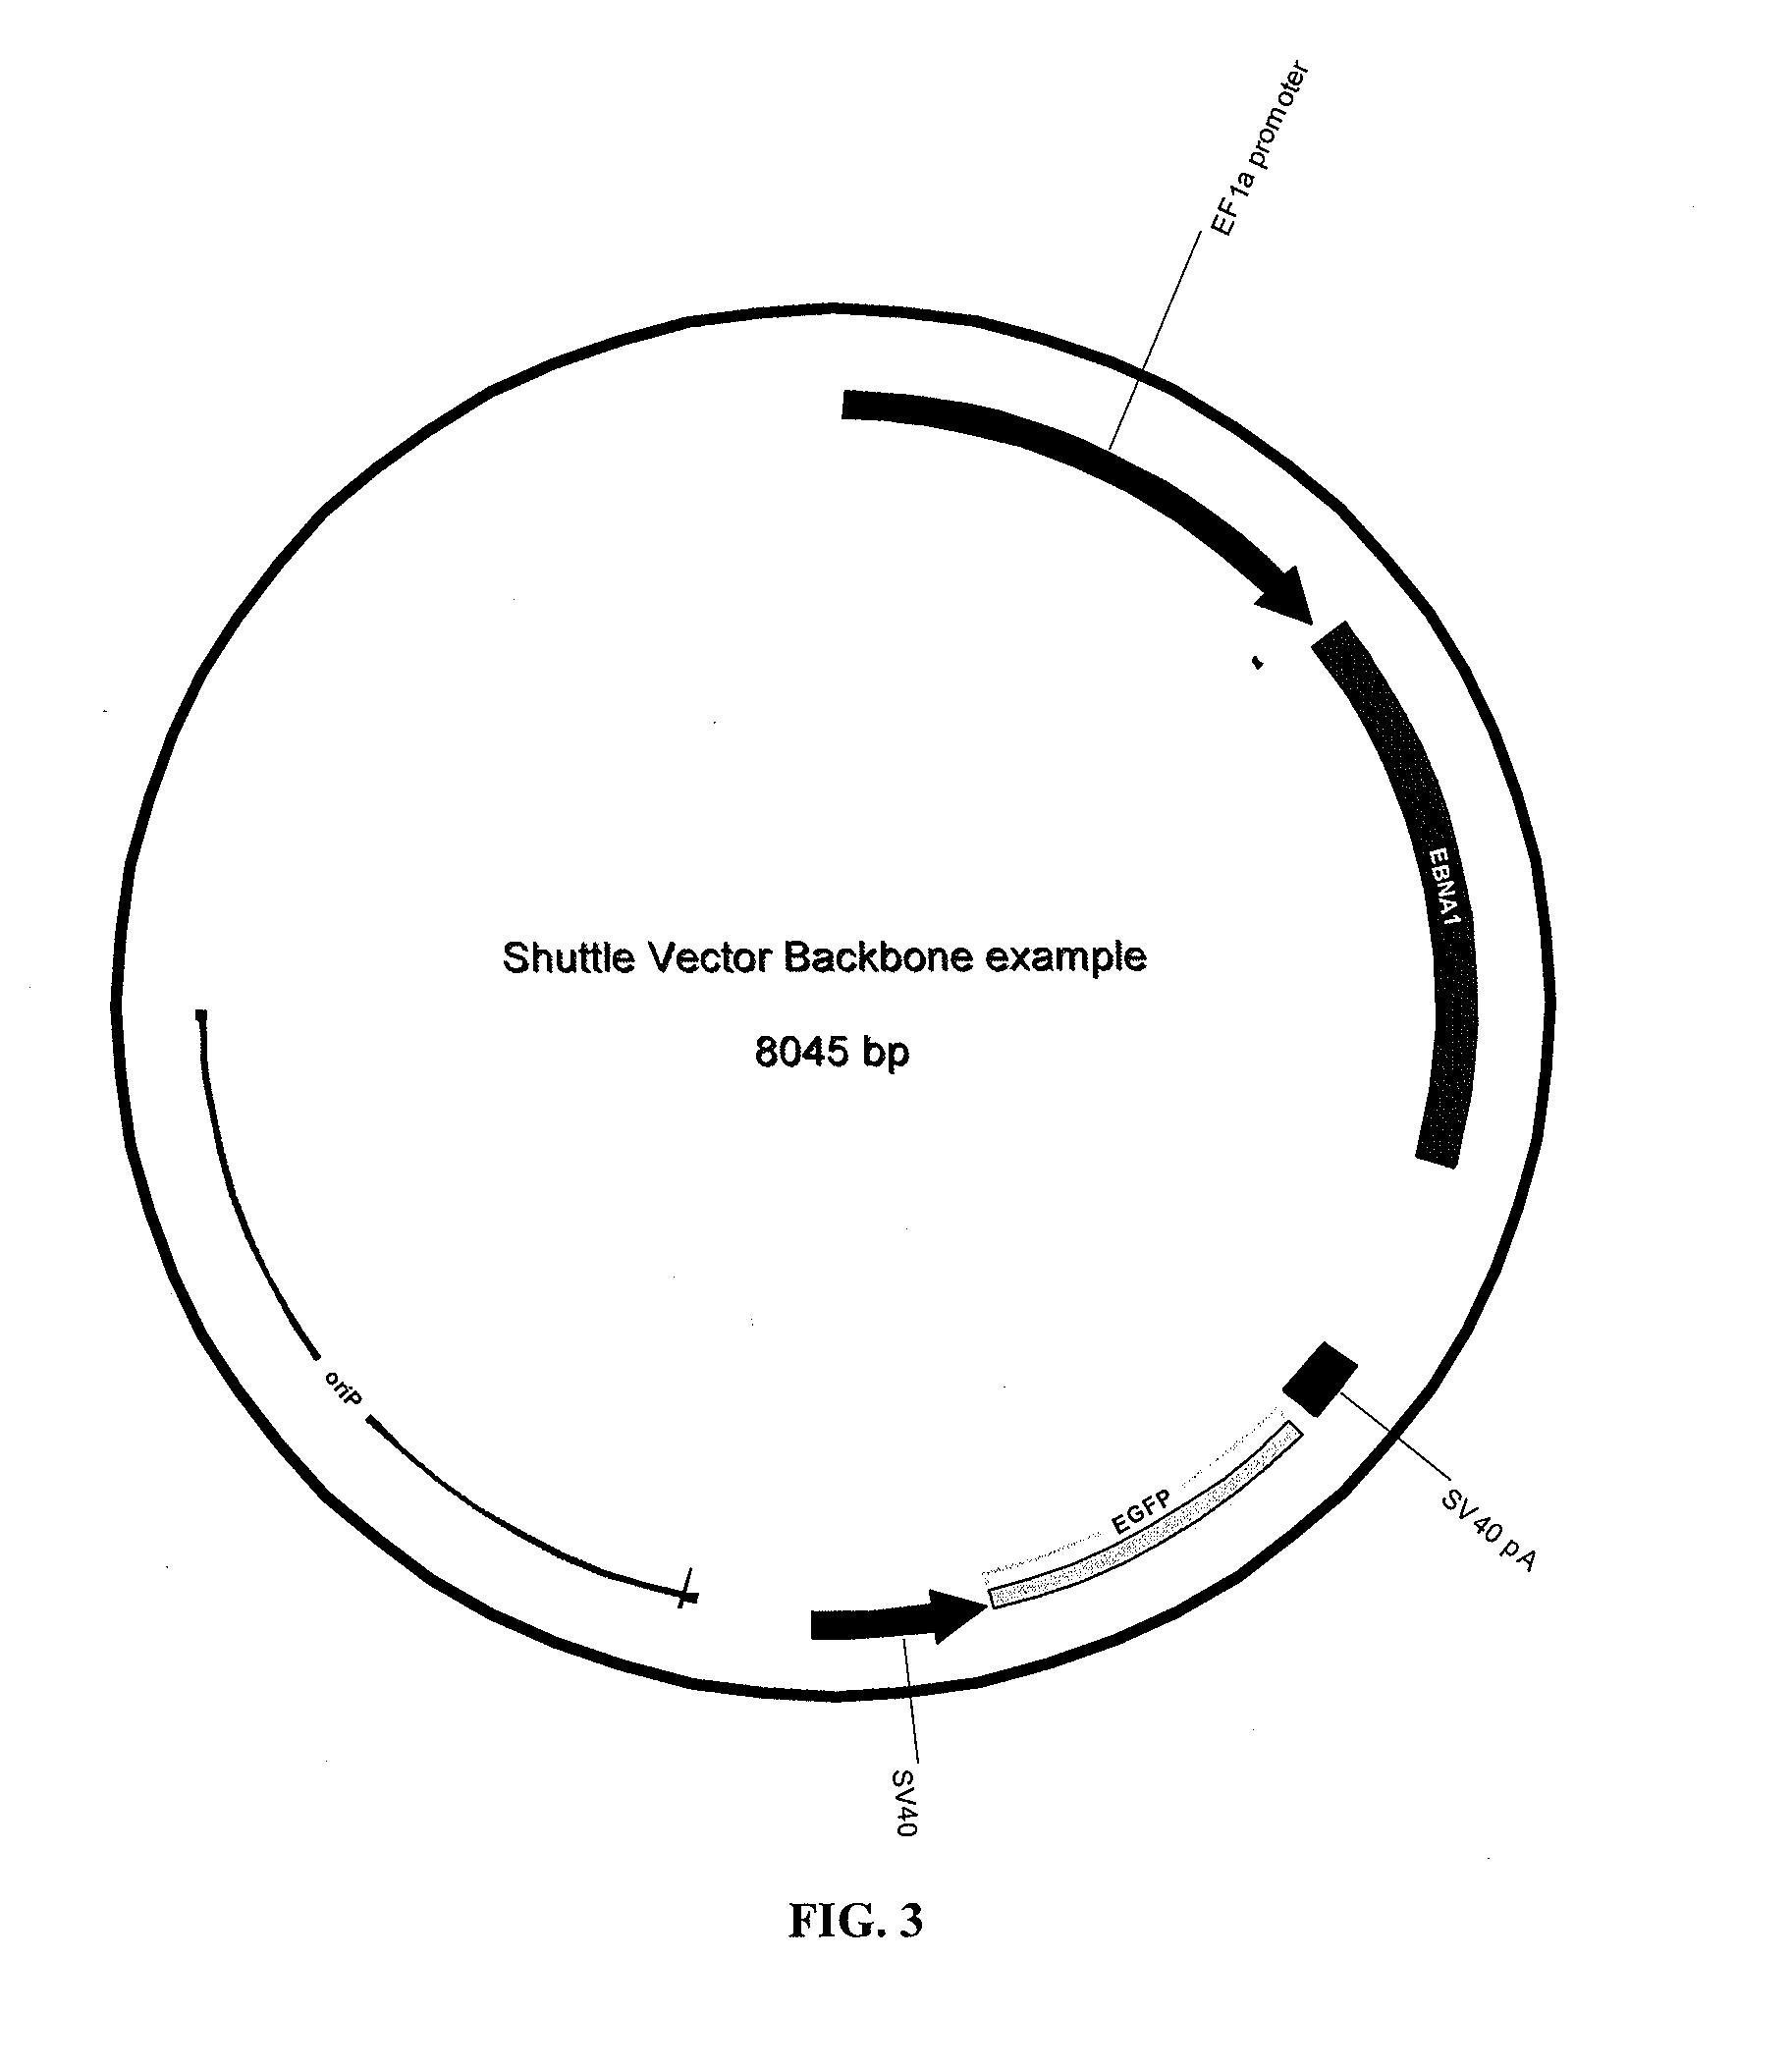 Methods for the production of ips cells using non-viral approach